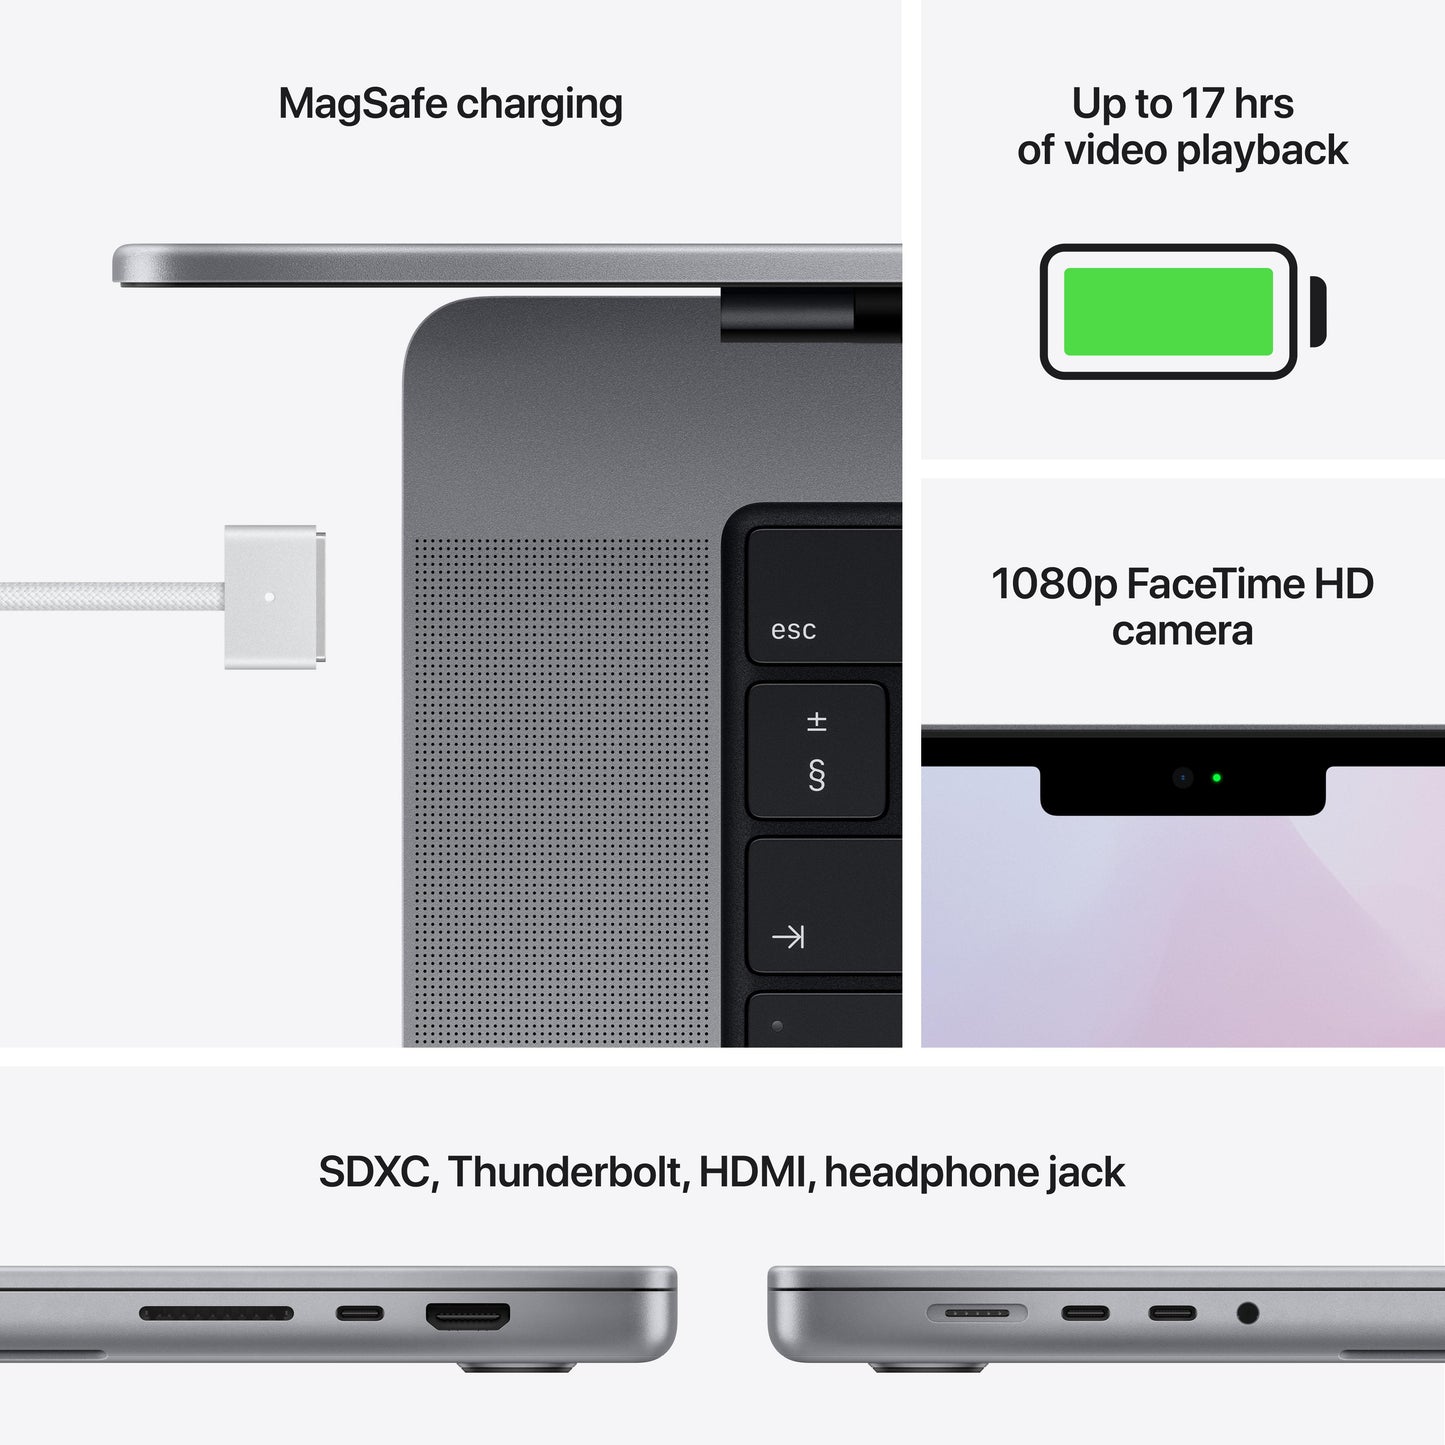 14-inch MacBook Pro: Apple M1 Pro chip with 8?core CPU and 14?core GPU, 512GB SSD - Space Grey